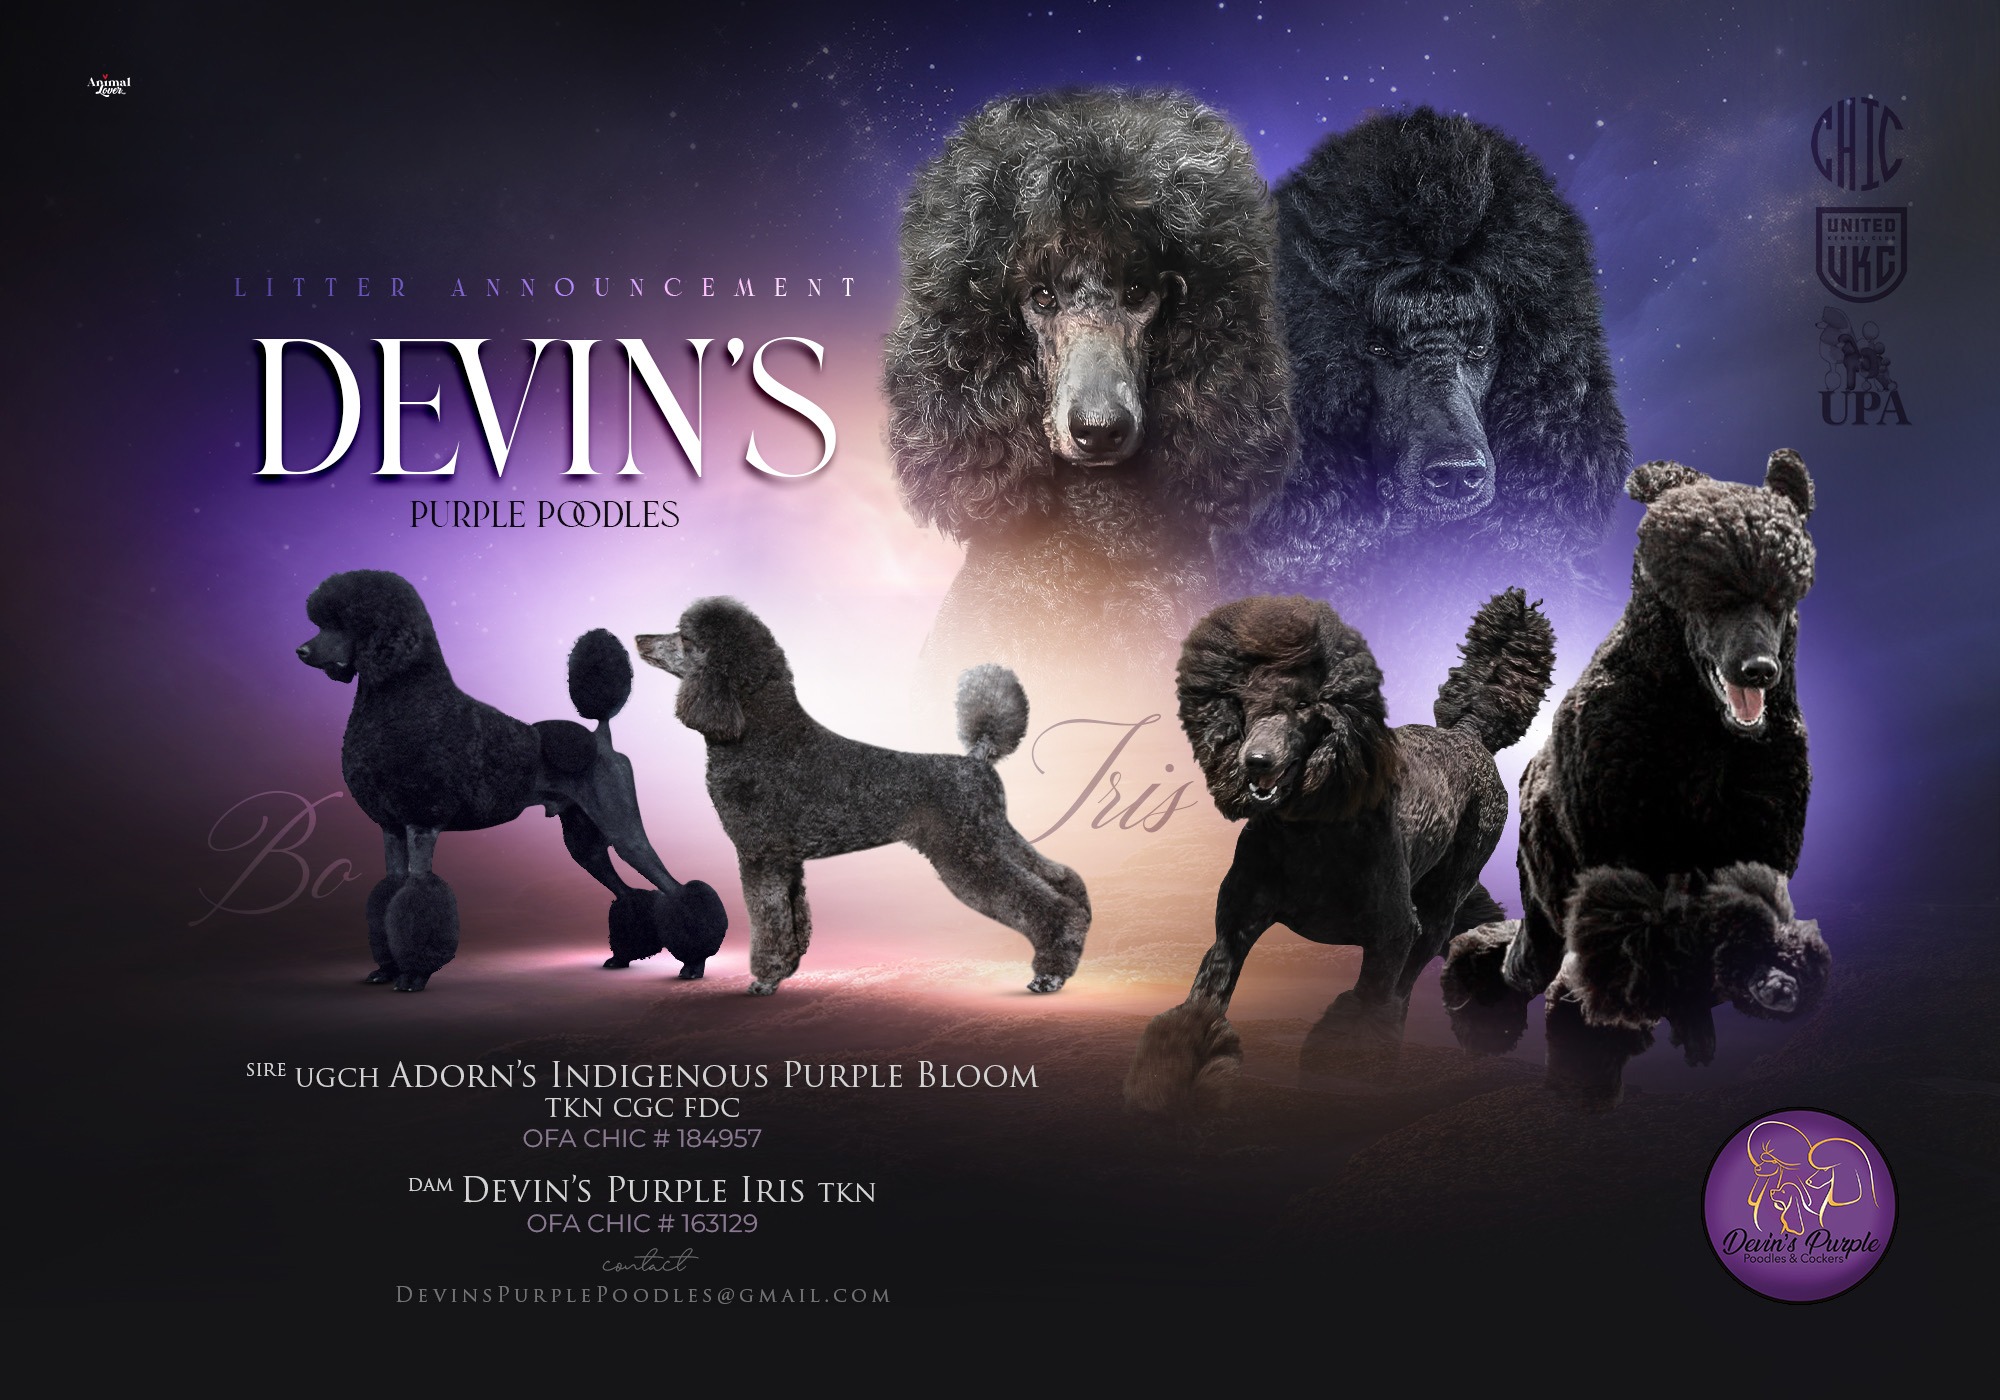 Devins Purple Poodles Puppies For sale in Nebraska ofa health tested sable poodle rescue adult litter show dog akc ukc registered black abstract solid Omaha